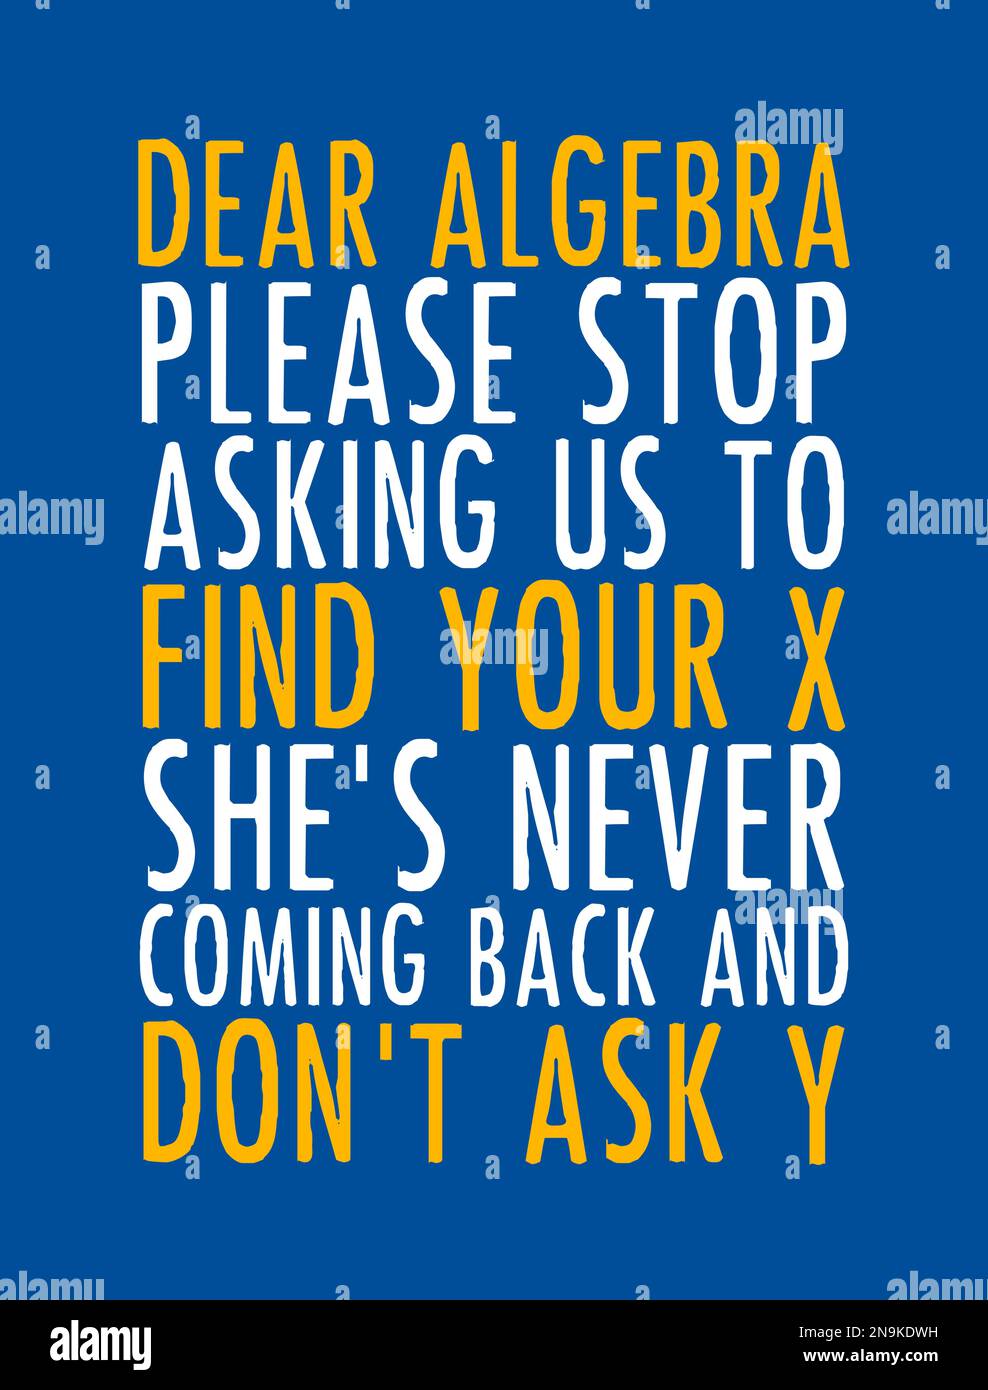 Funny Mathematics Quote Design. Dear Algebra please stop asking us to find your X she's never coming back and don't ask Y. Stock Vector